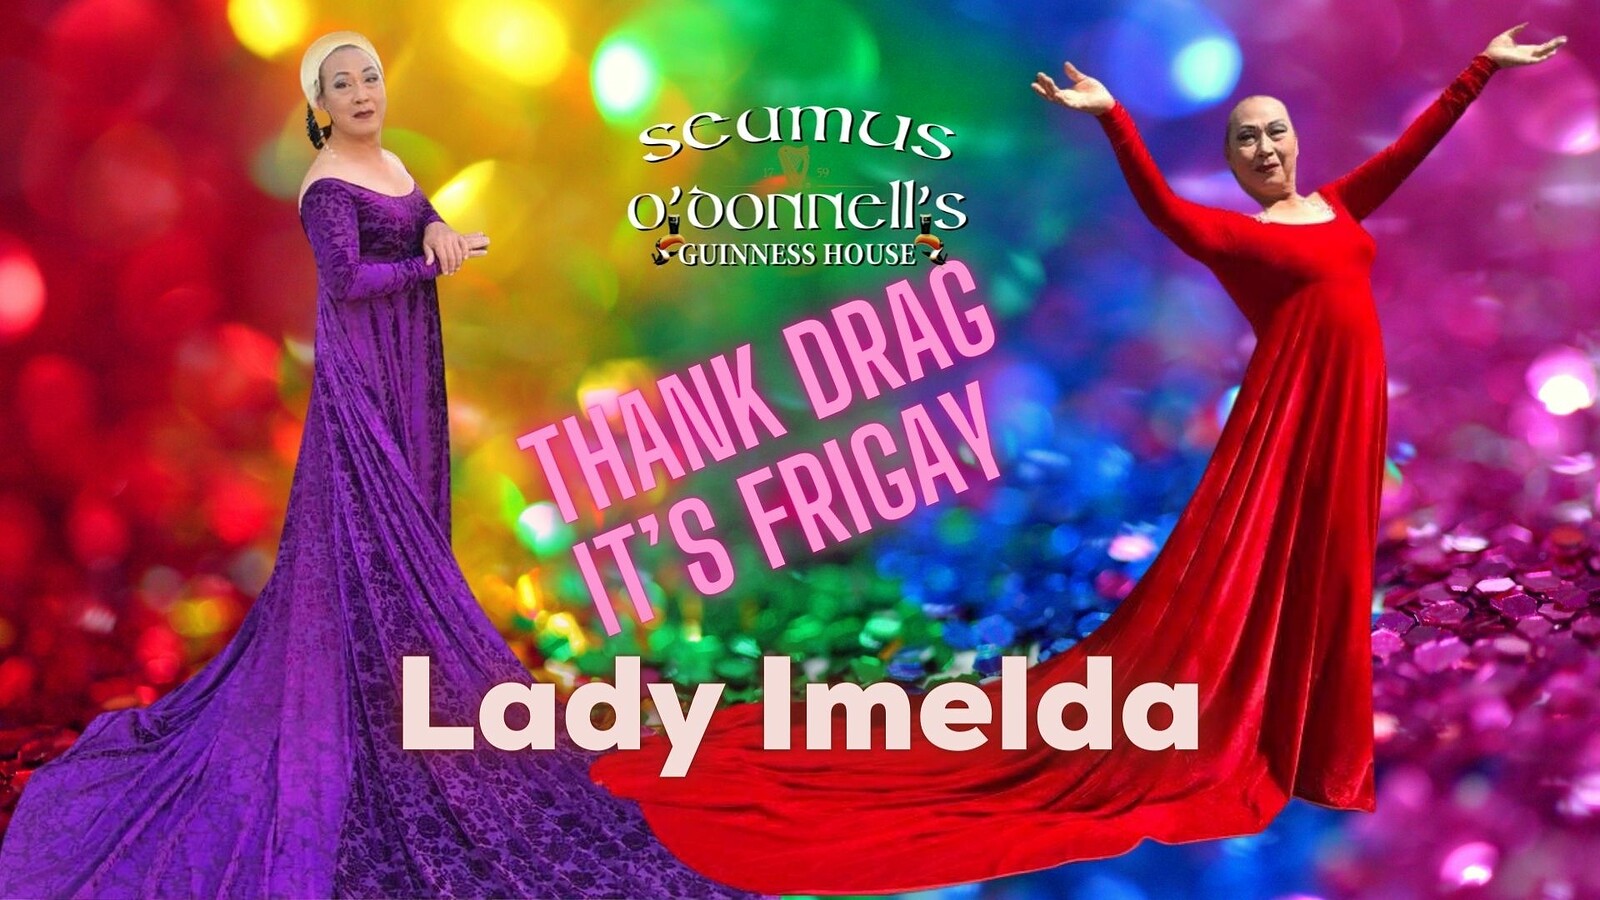 Thank Drag it's FriGay with Lady Imelda at Seamus O'Donnell's